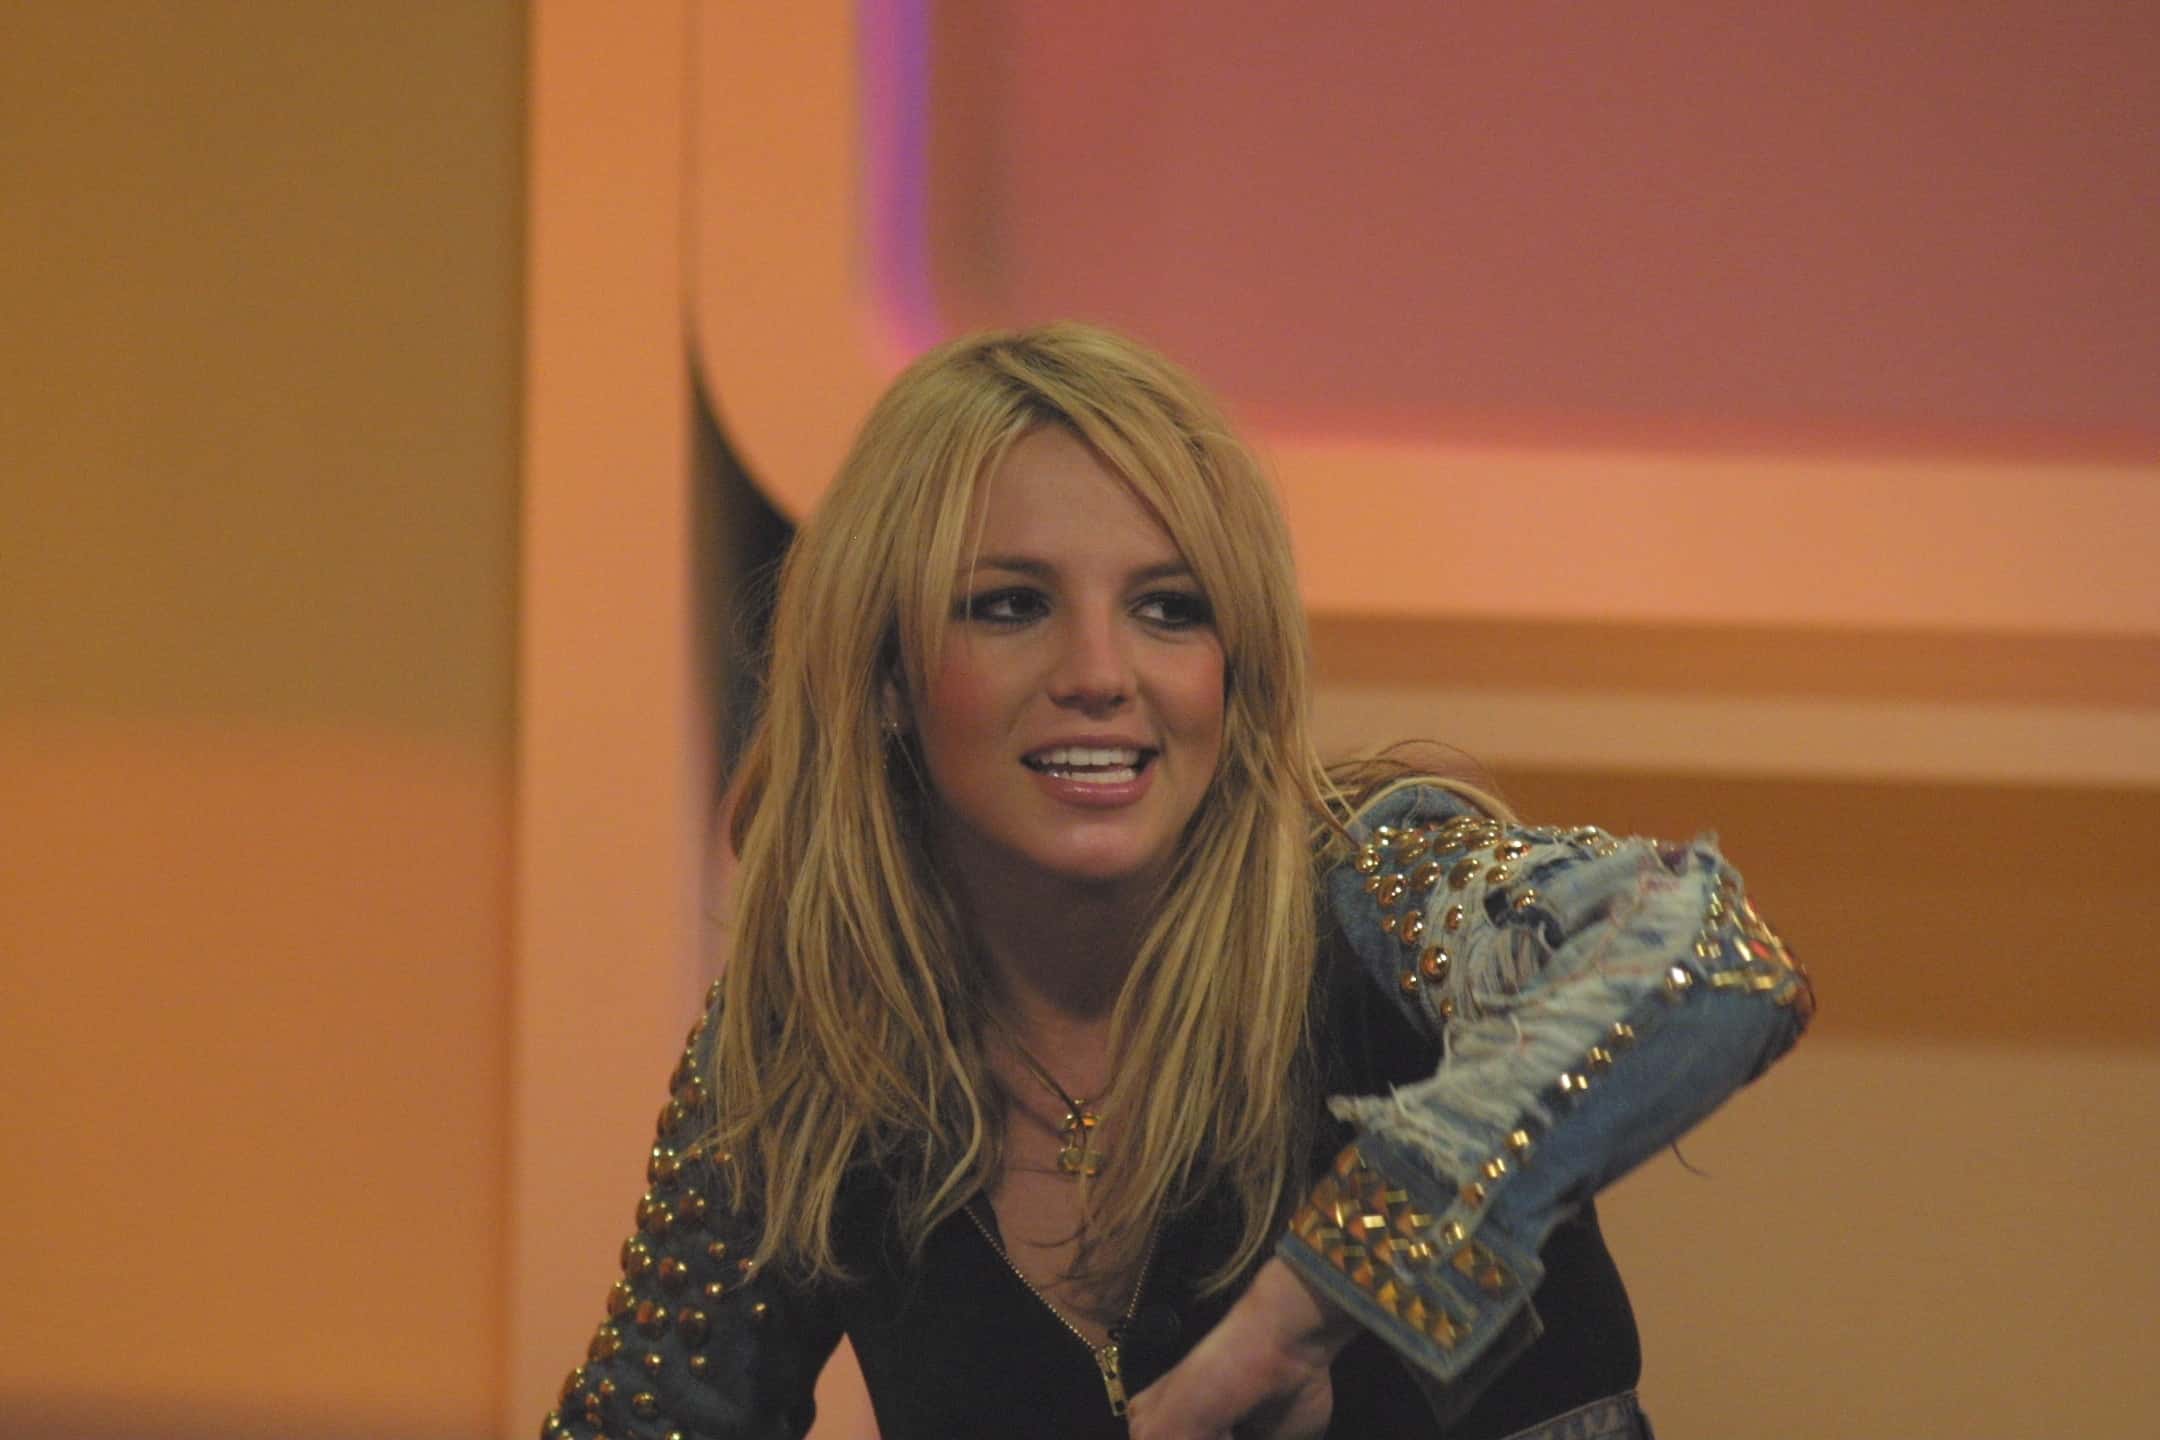 Britney Spears, Music Channel 'Viva', Cologne, Interview.